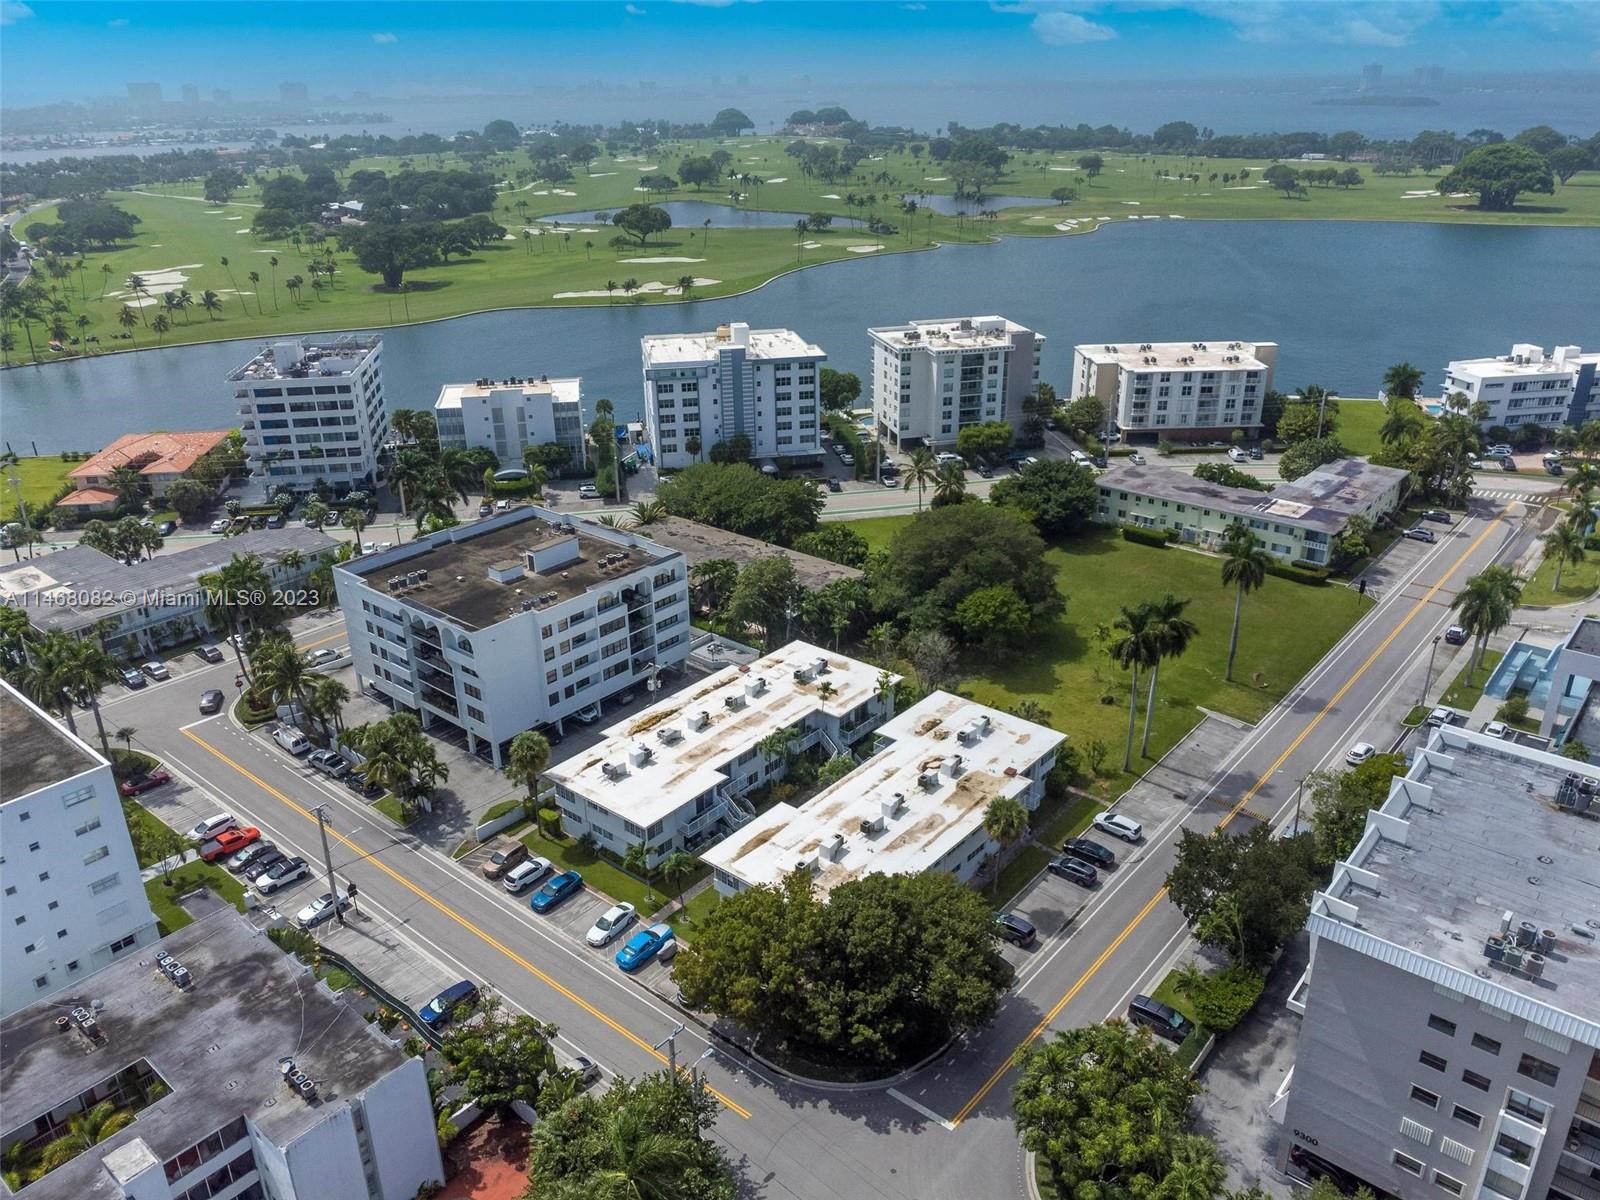 Amazing opportunity to own a Spacious and Bright 2 BR/2Bath top floor condo in highly desirable Bay Harbor Islands. Unit features Large Bedrooms, Impact windows, New washer/dryer inside of unit, Terrace, updated bathrooms & porcelain floors throughout. Master has walk-in closet. Perfect for investors that want to rent right away! Pet friendly! Low maintenance fee! Within walking distance to "A" rated Elementary school, Bal Harbor Shops, great restaurants and Places of Worship.  Unit is on the 2nd Floor.